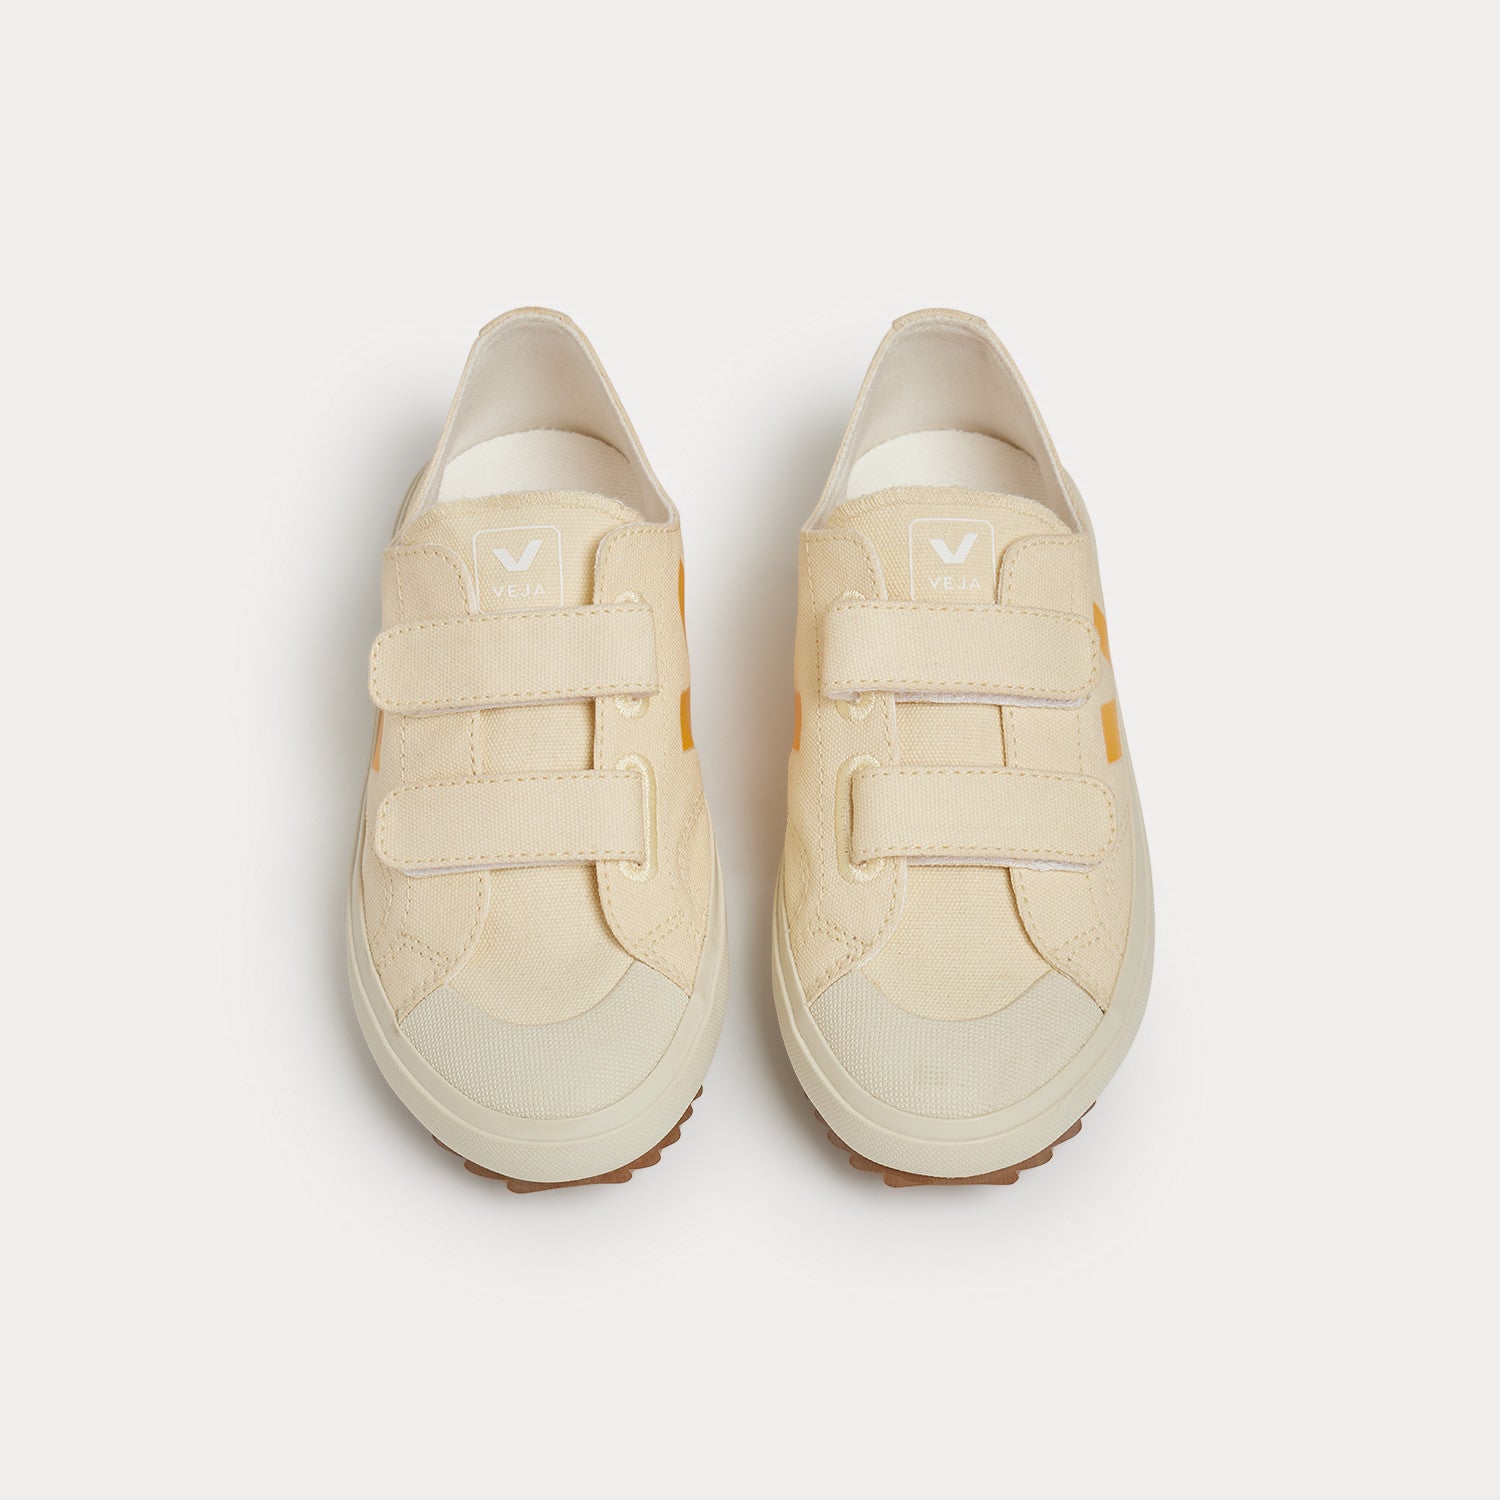 Boys & Girls Ivory Canvas Shoes